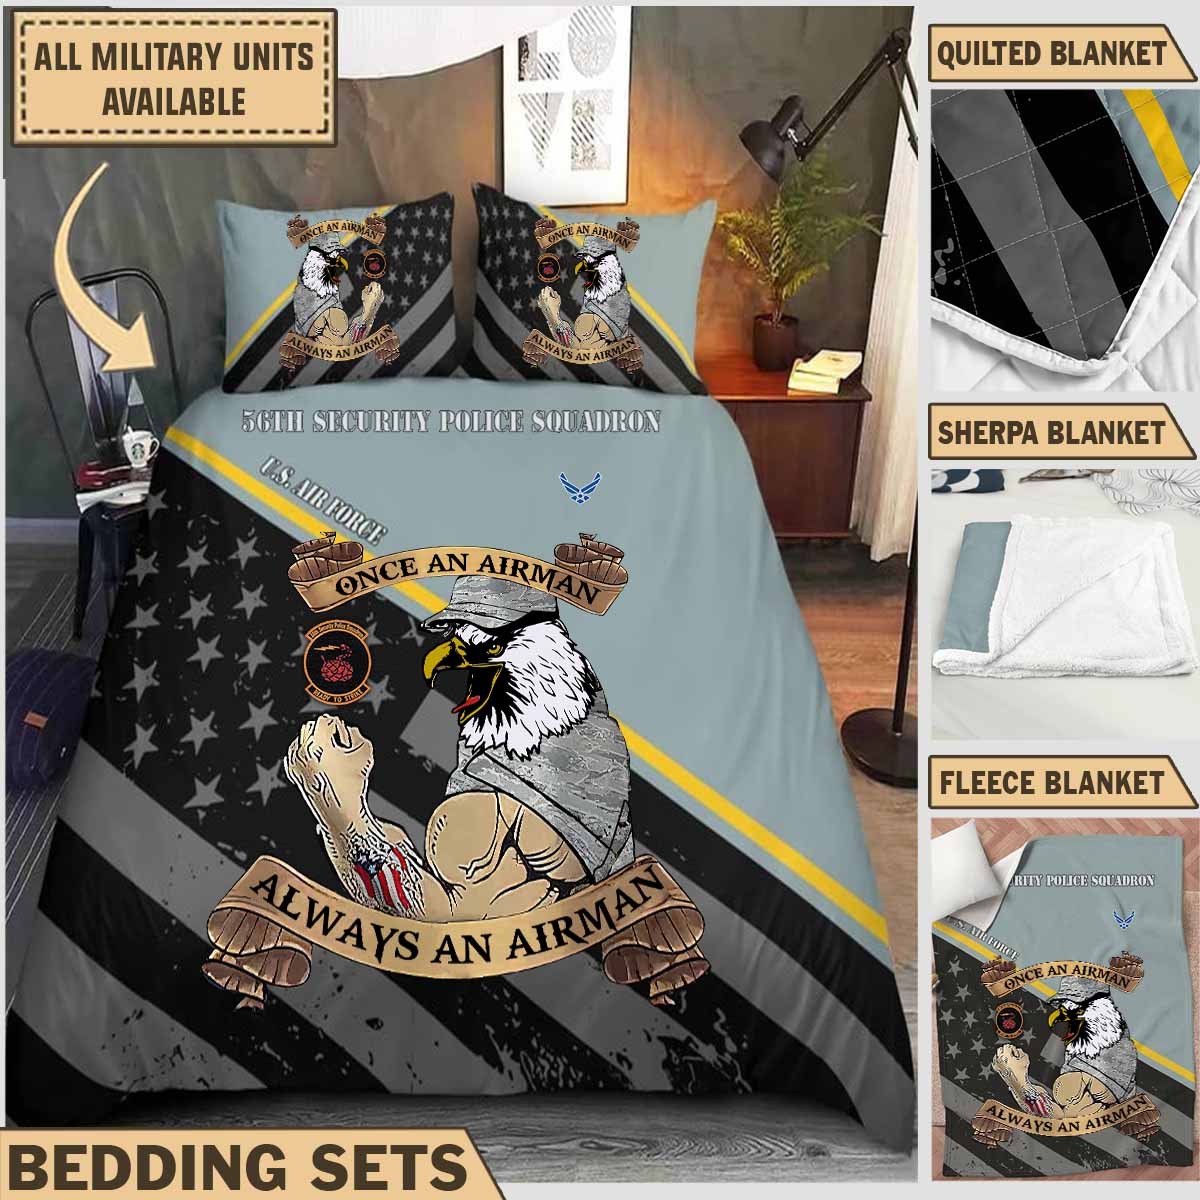 56th sps security police squadronbedding collection brwfn